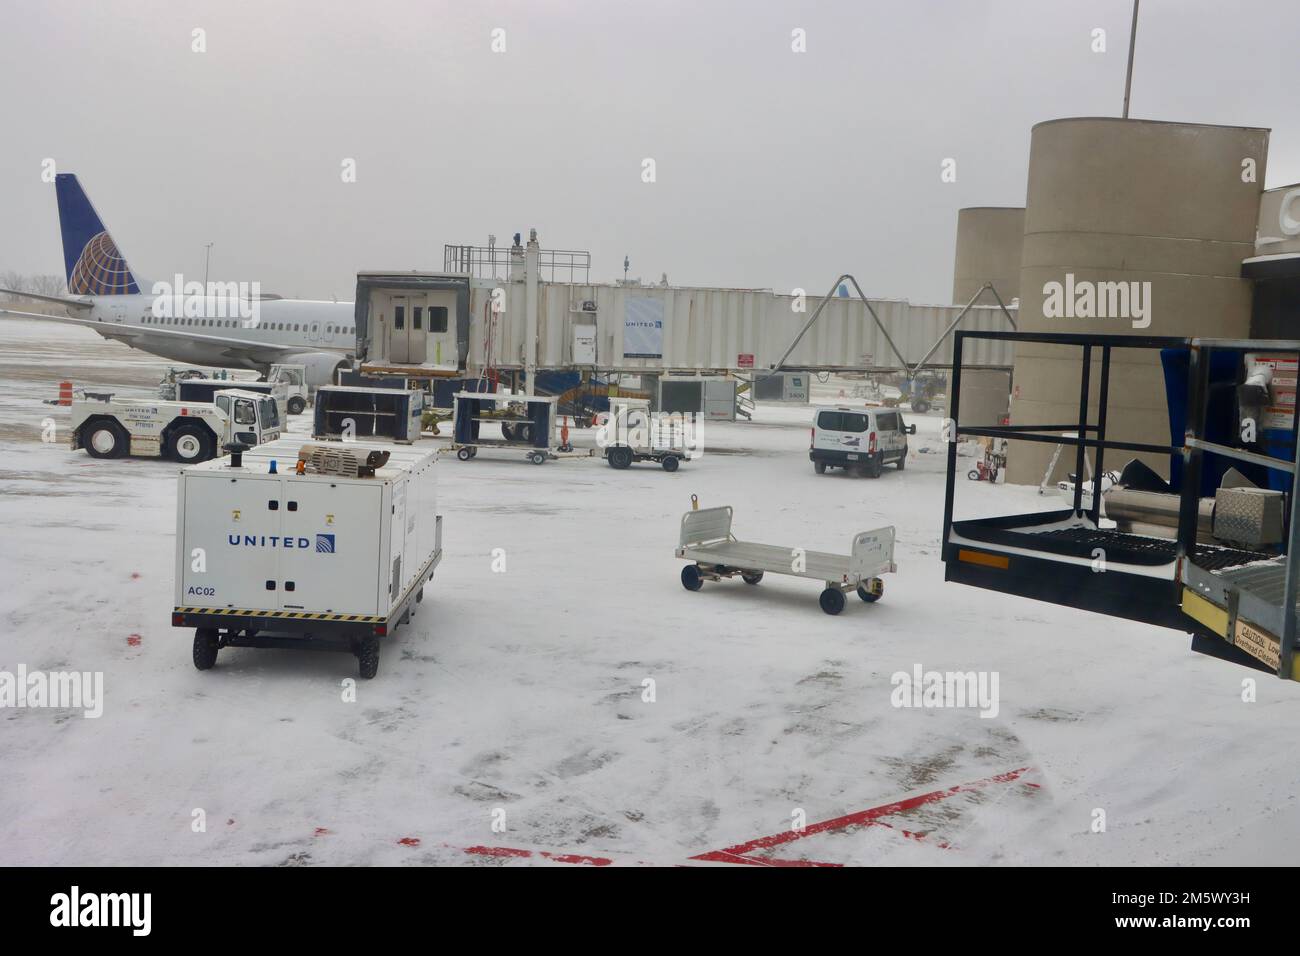 United Airlines plane loading at Cleveland Hopkins airport on Christmas Eve after massive snowstorm Stock Photo